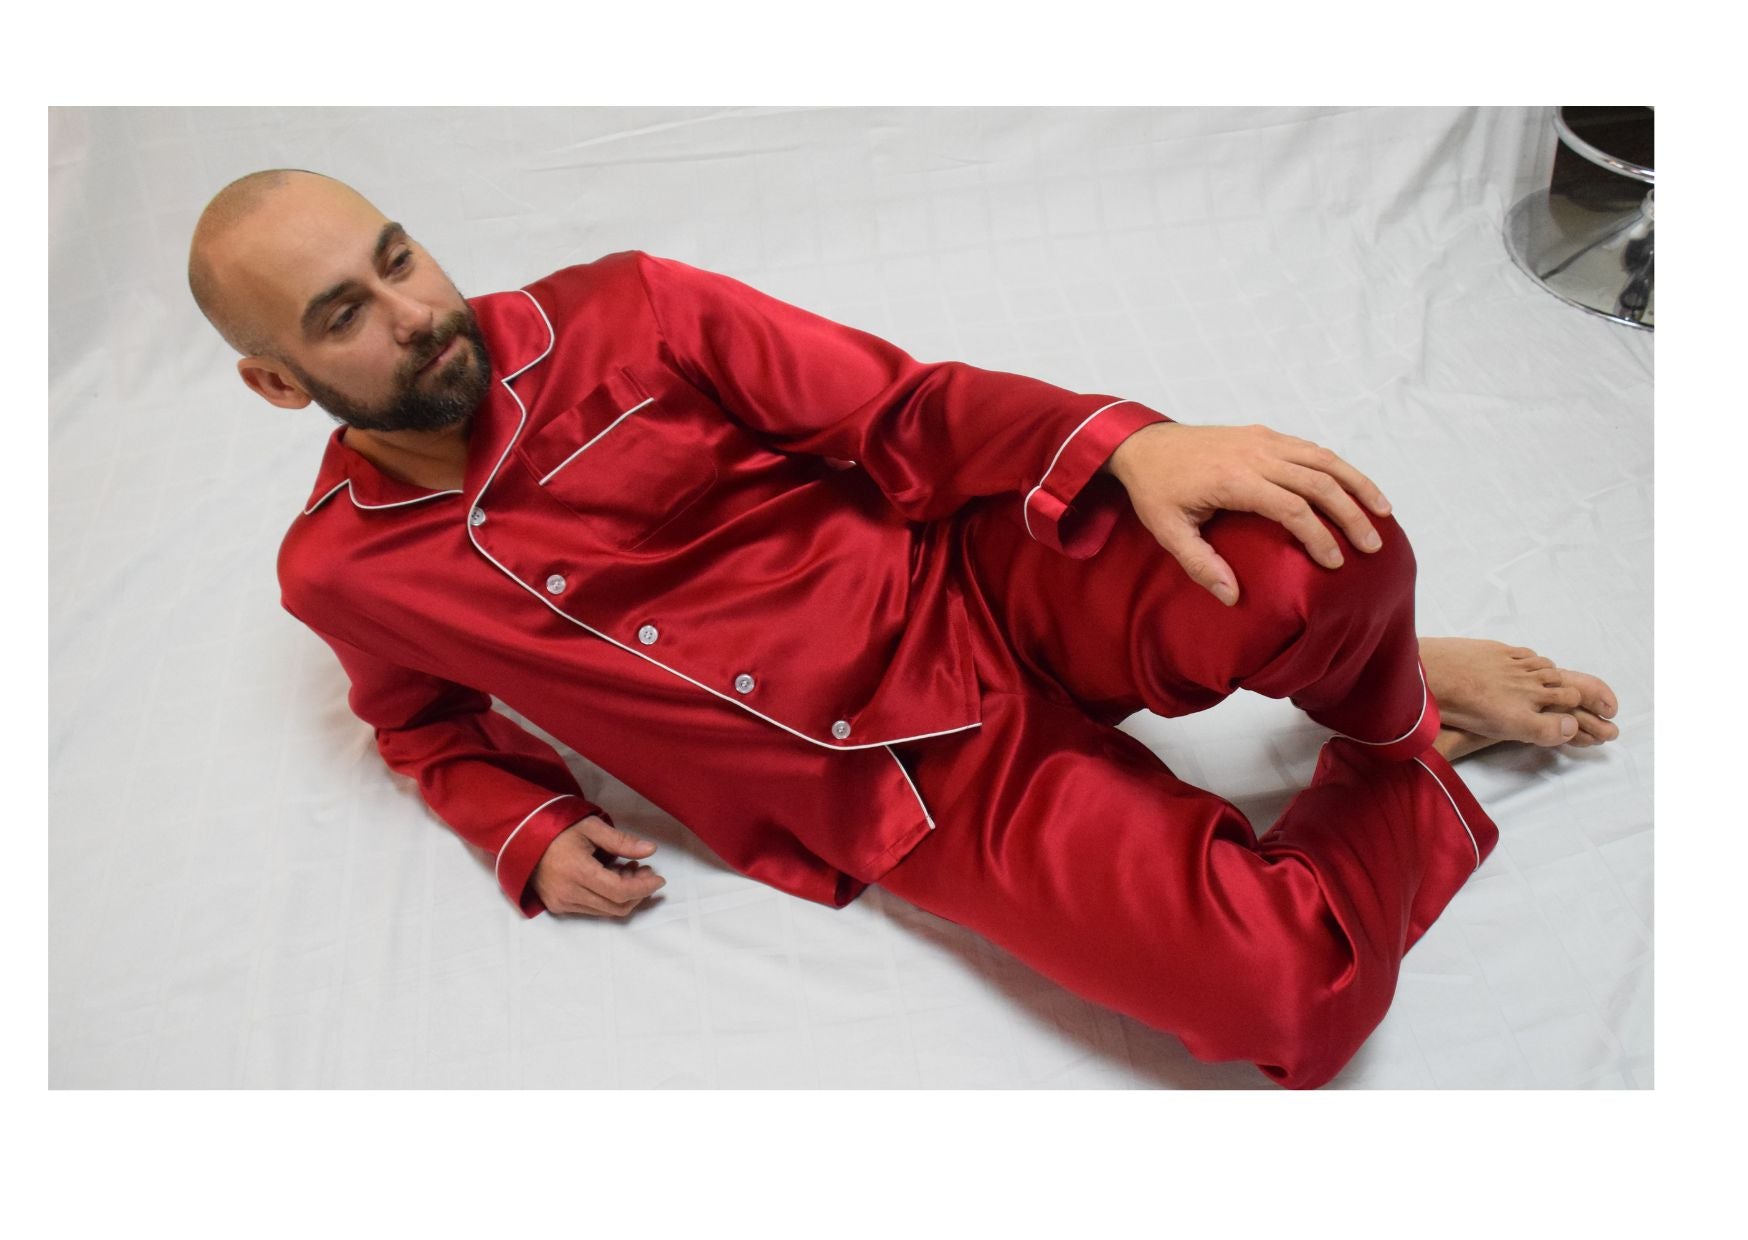  Men's Red Pajama Set - Men's Red Pajama Set -  -  - fine silk products by Forsters Finery